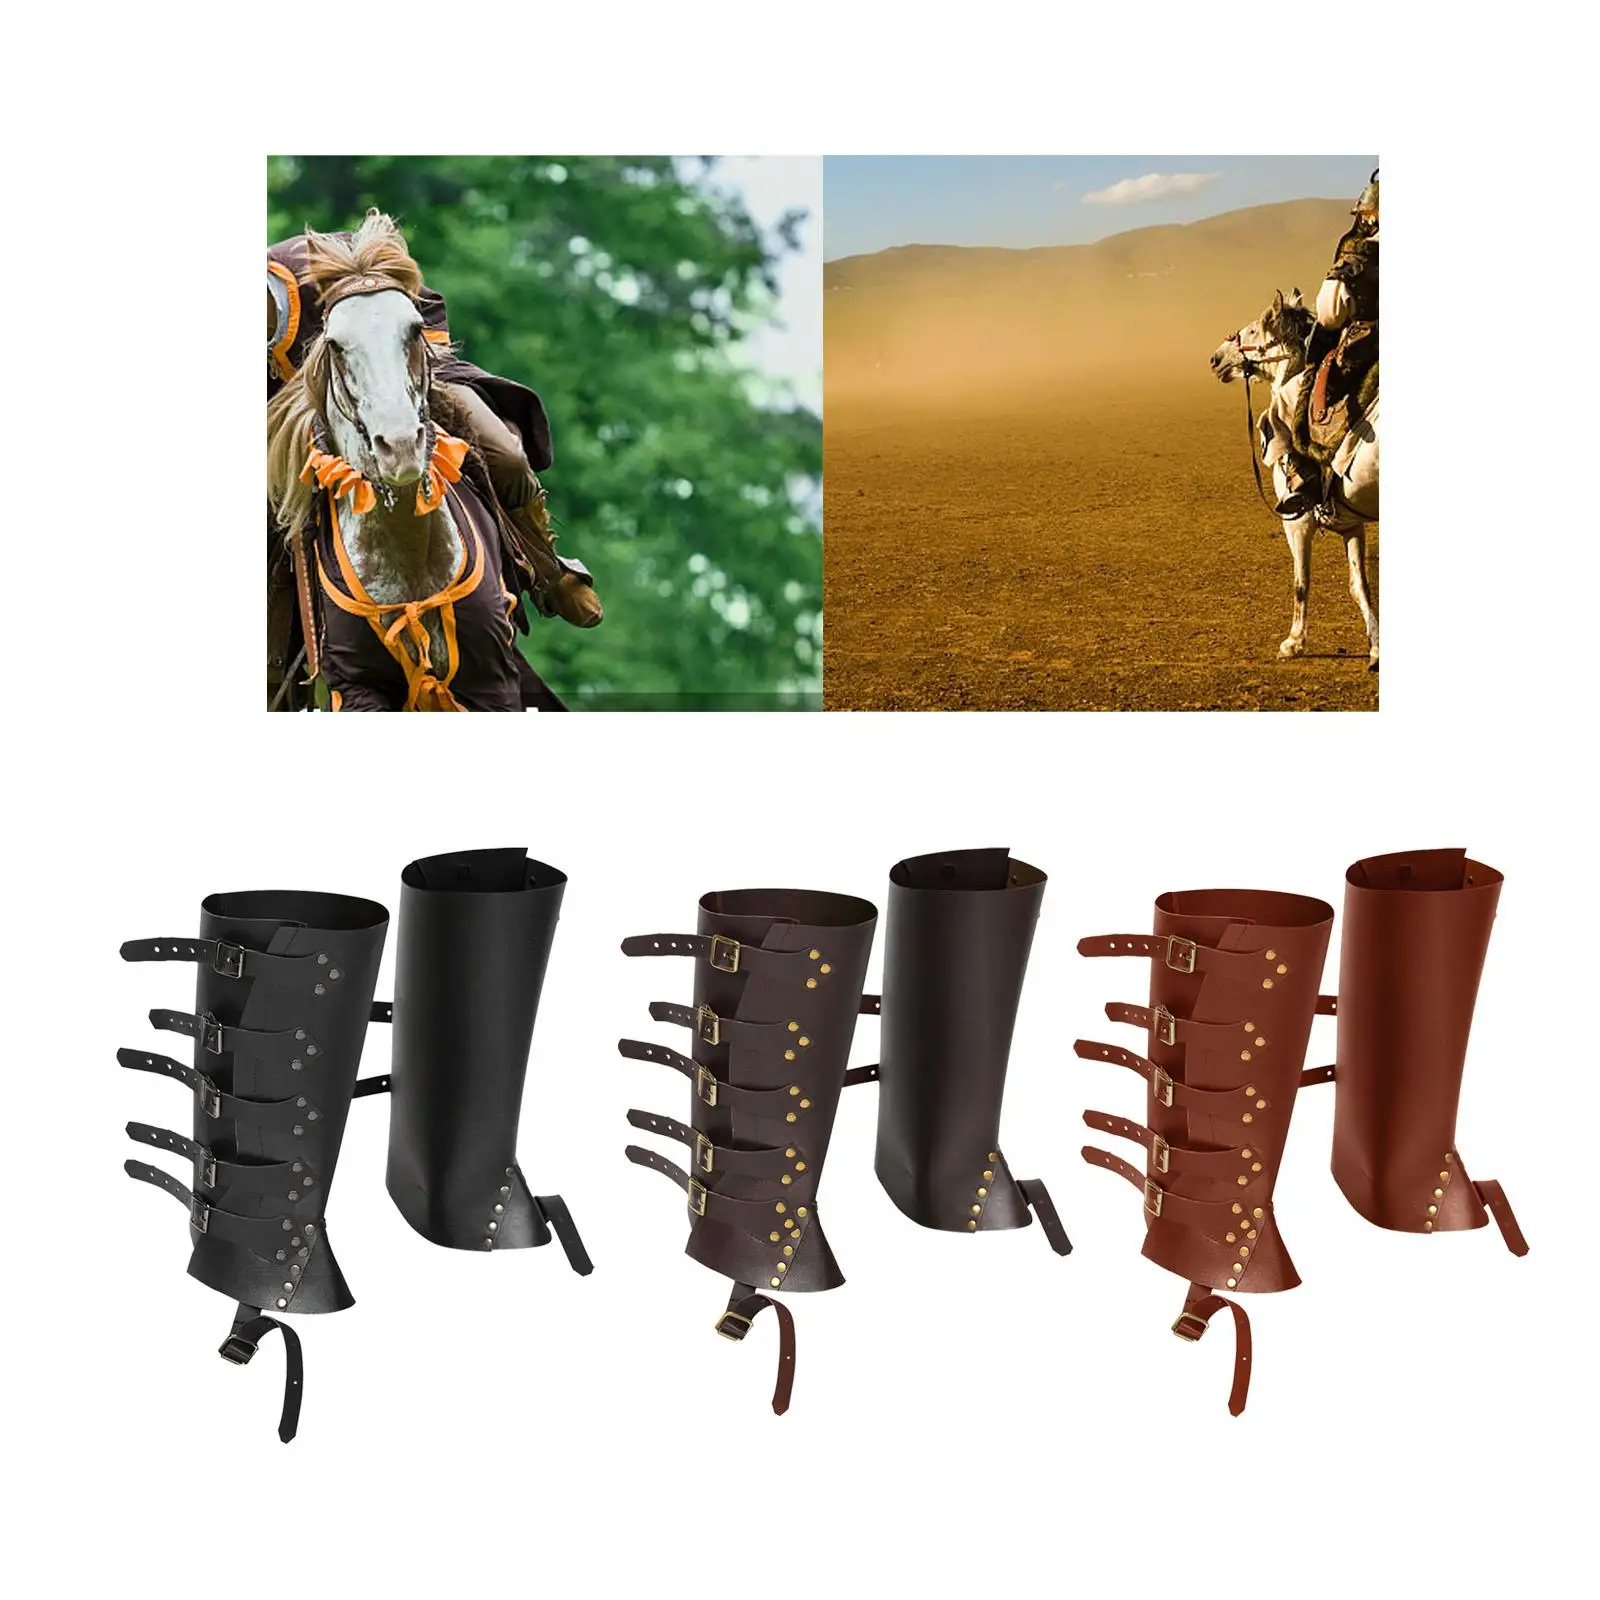 Vintage Style Medieval Boots Shoes Cover Guards Faux Leather Adjustable Protective Photo Props Pirate Boots Tops Covers